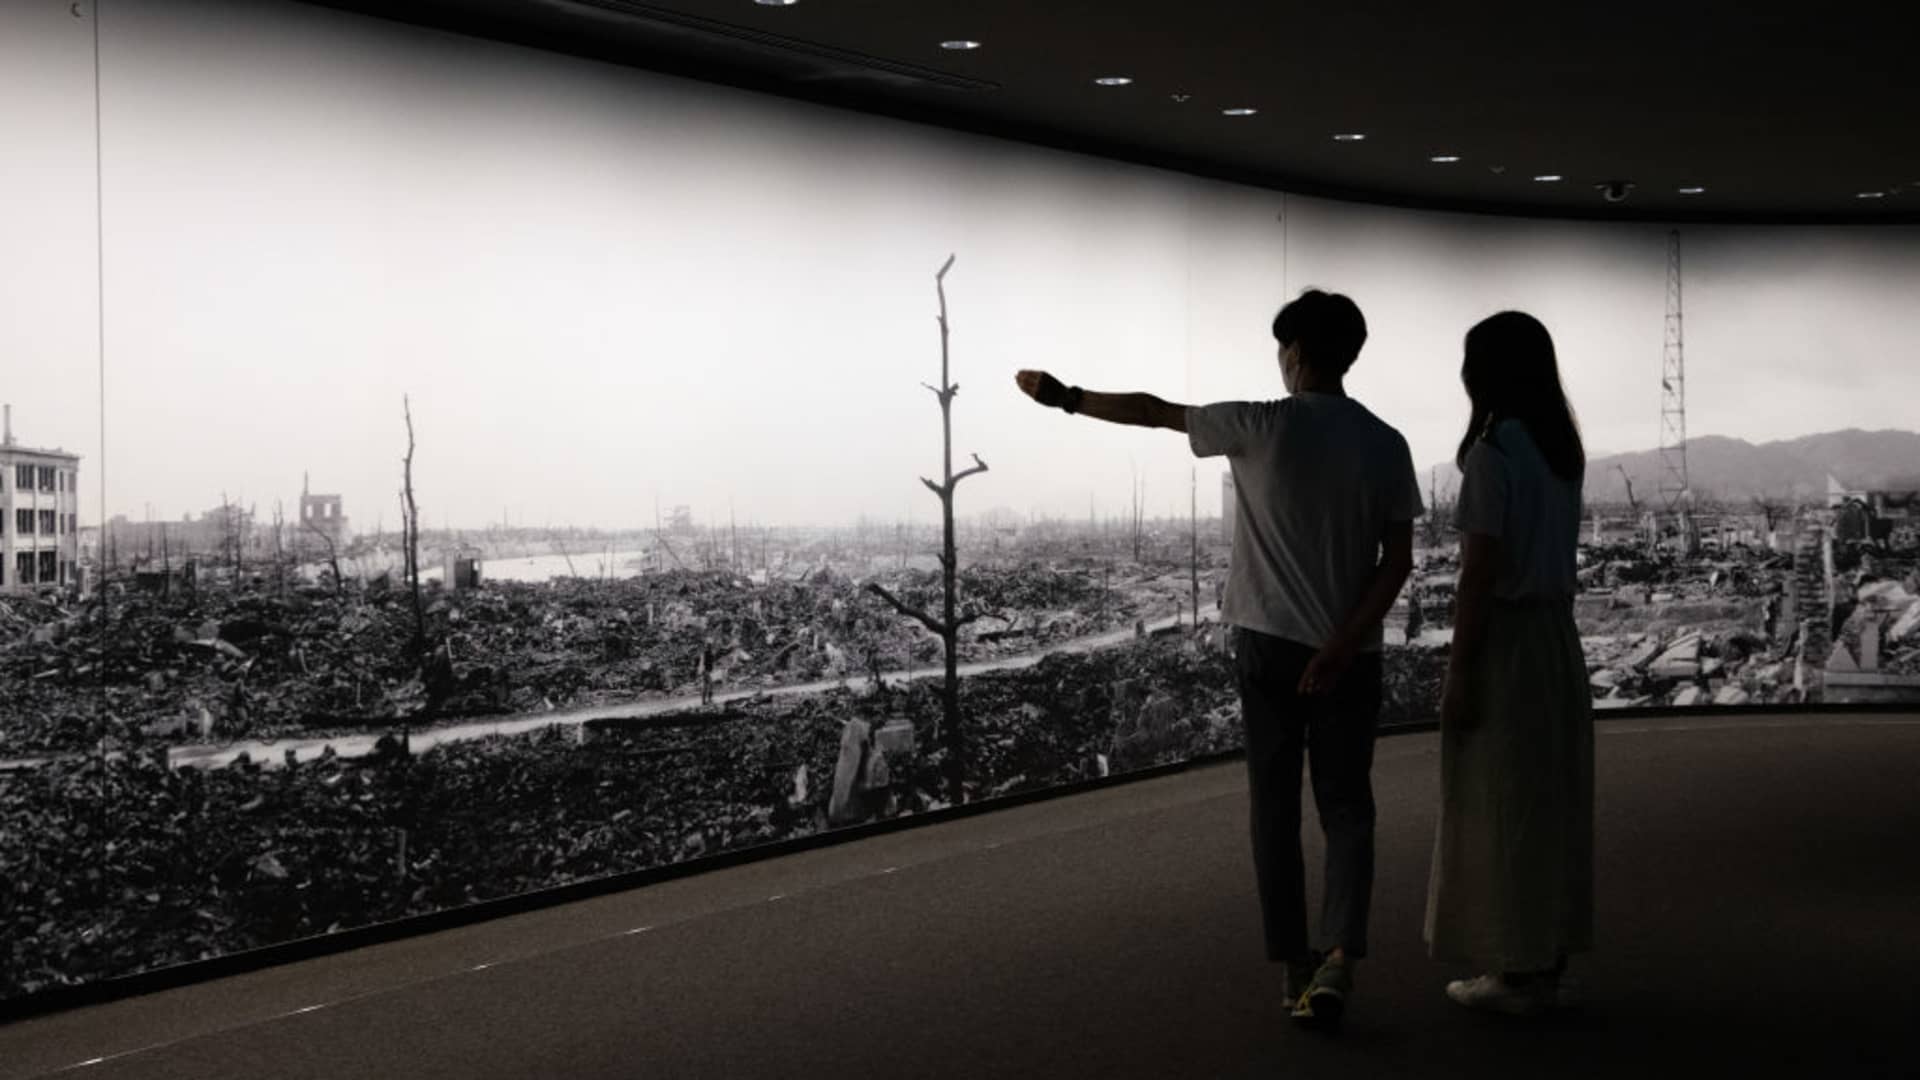 A virtual tour of the Hiroshima Peace Memorial Museum lets viewers examine objects recovered from the wreckage in 3D.